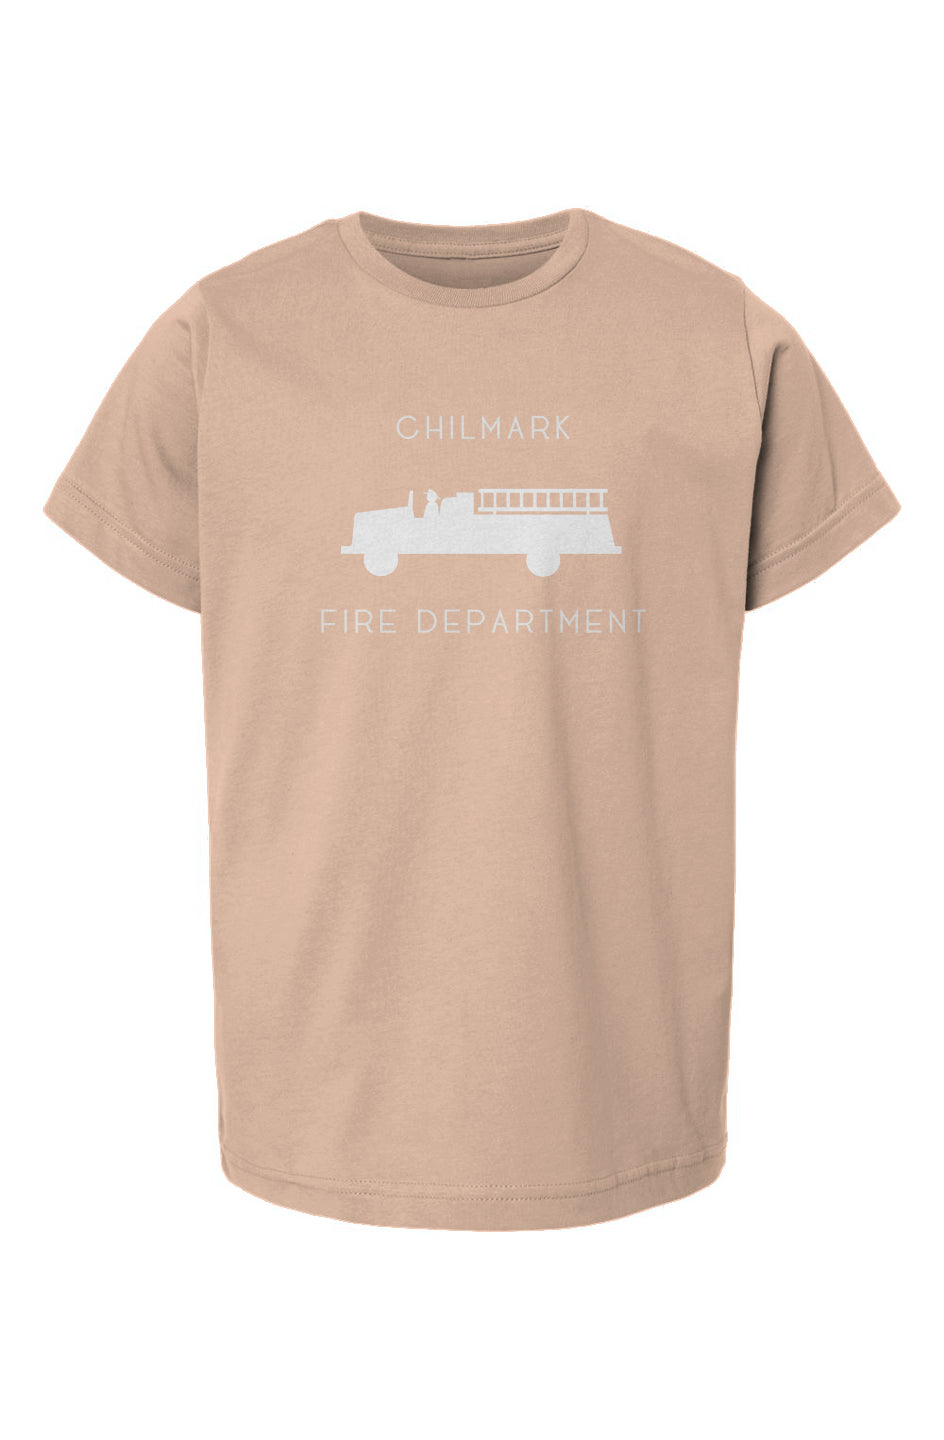 Chilmark Fire Department Youth Tee